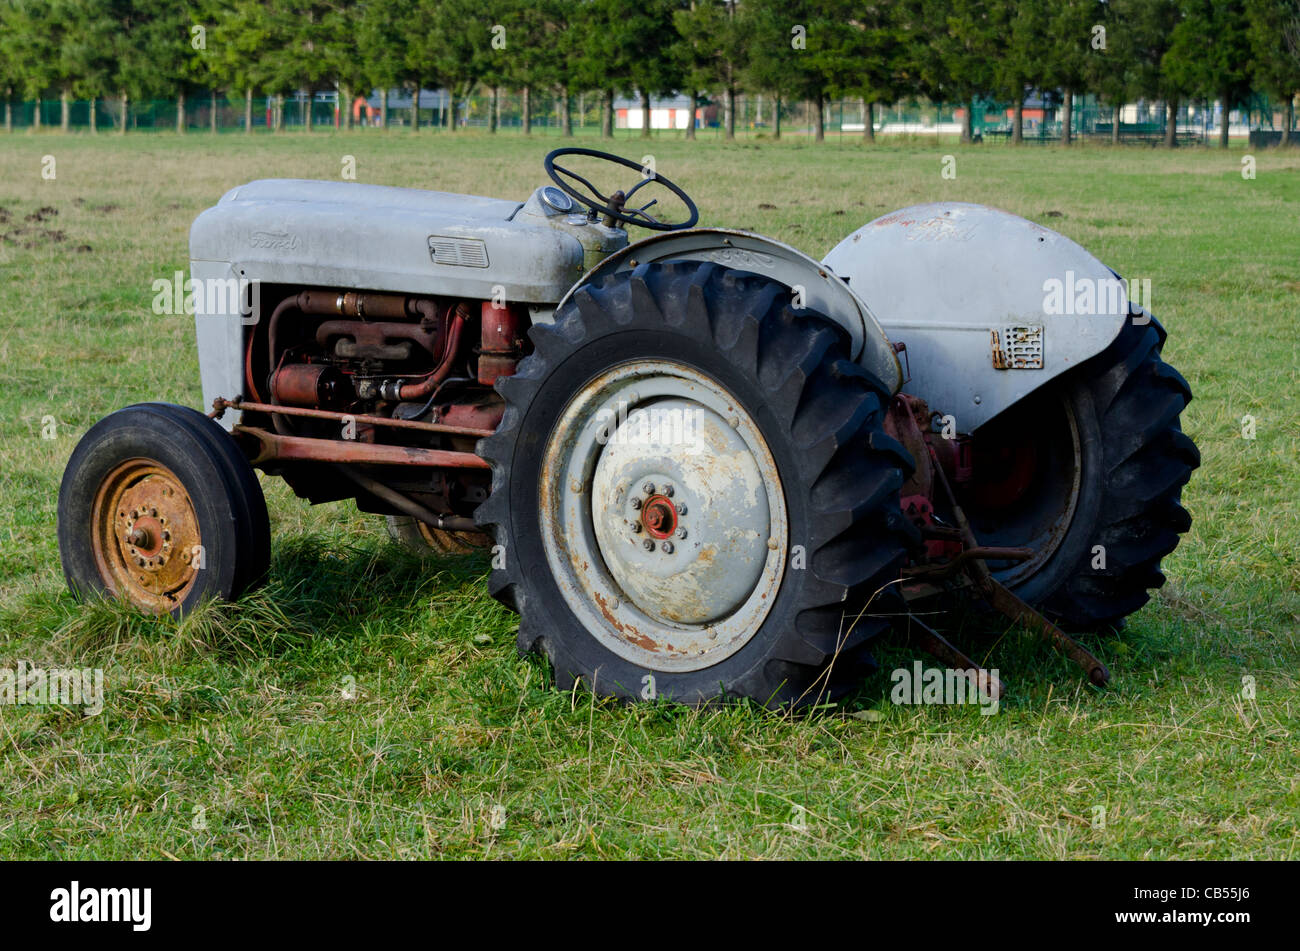 Antique Ford tractor Stock Photo